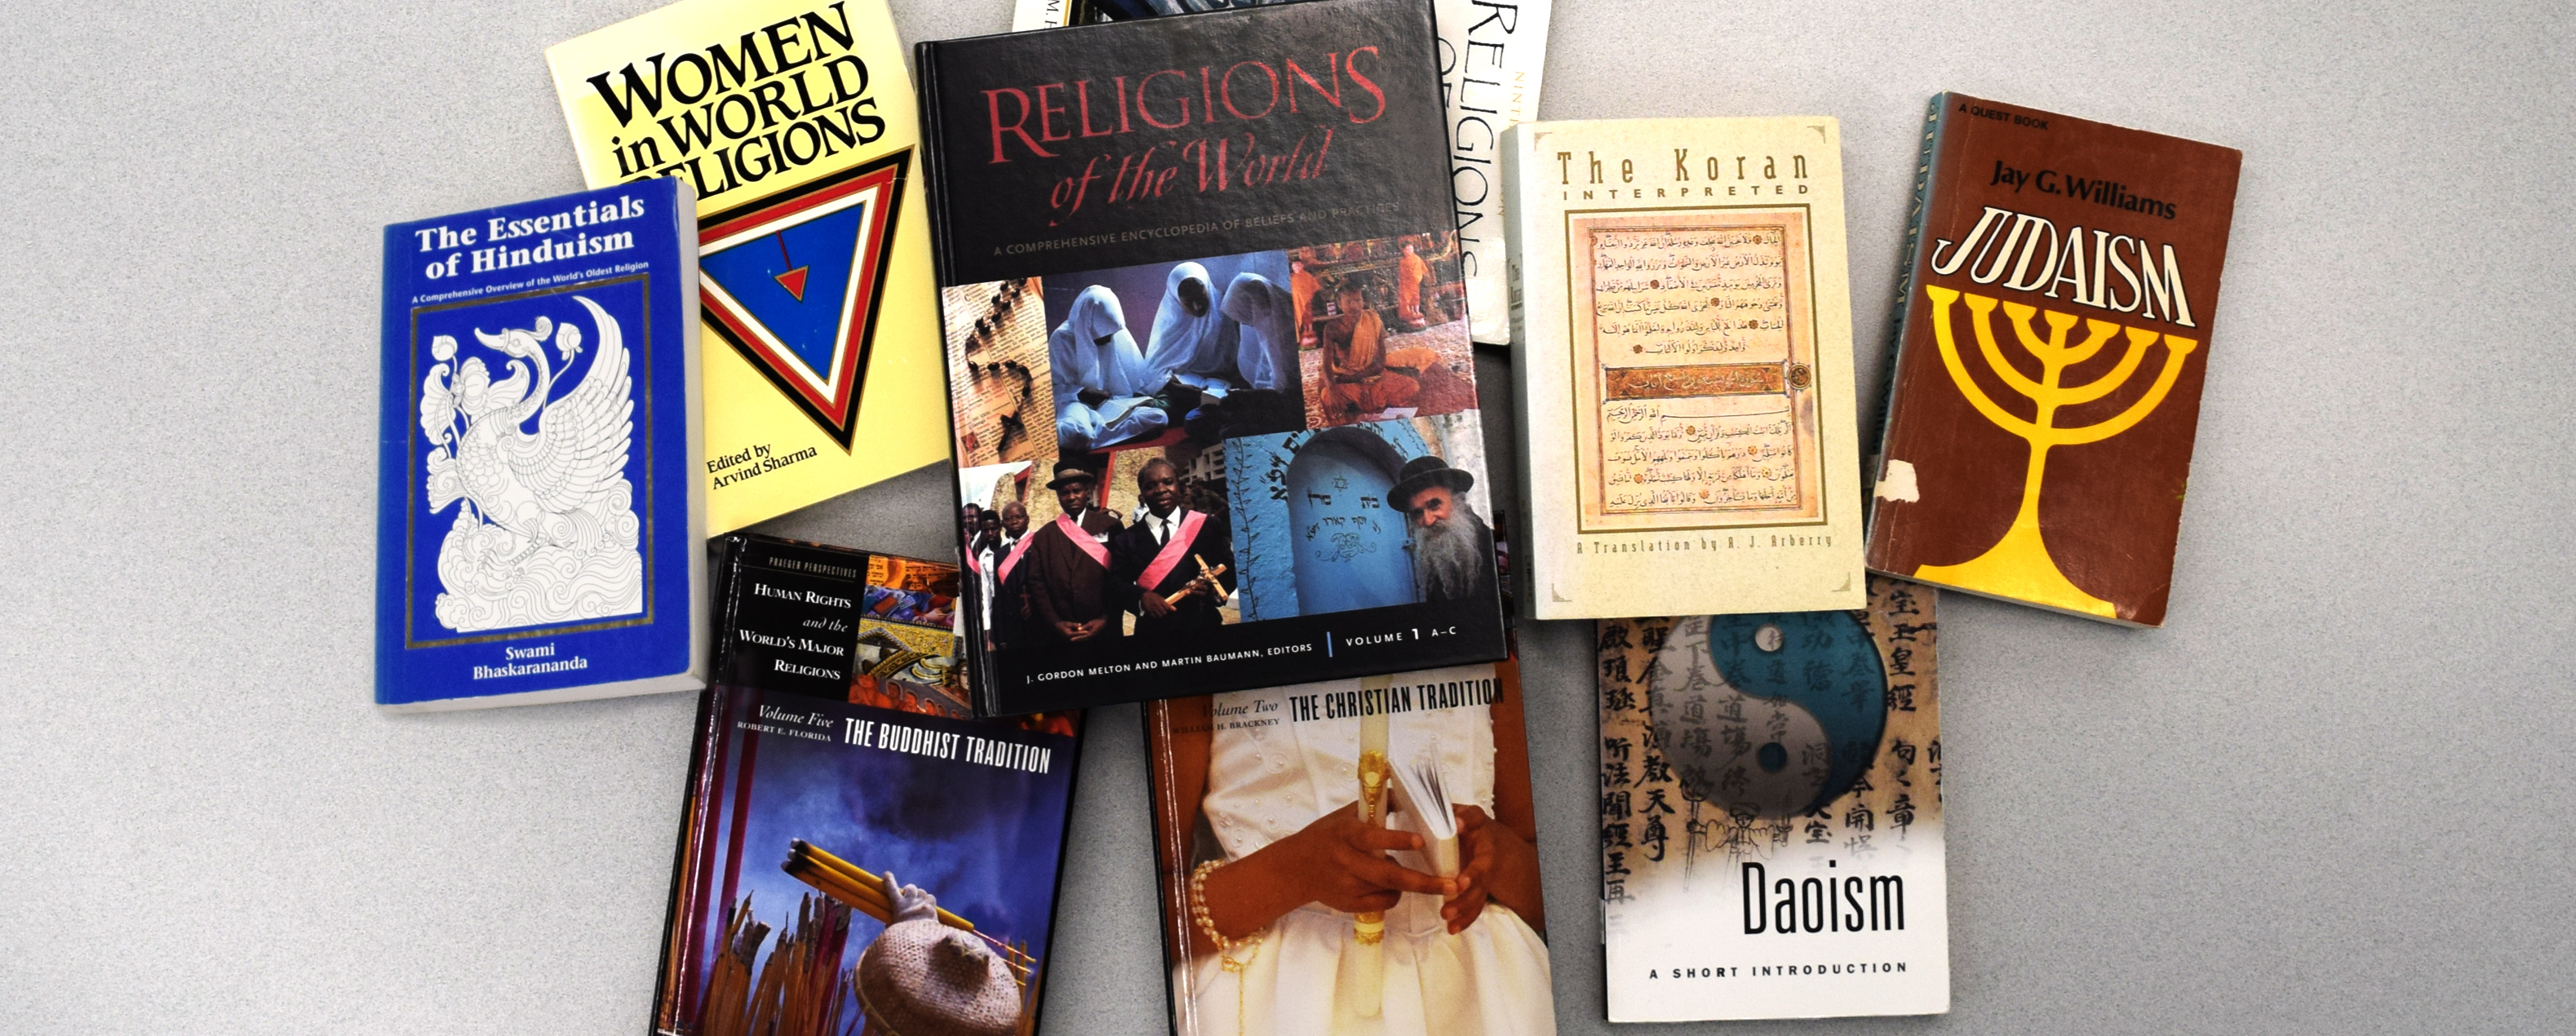 Nine books on various world religions spread out on a table top.